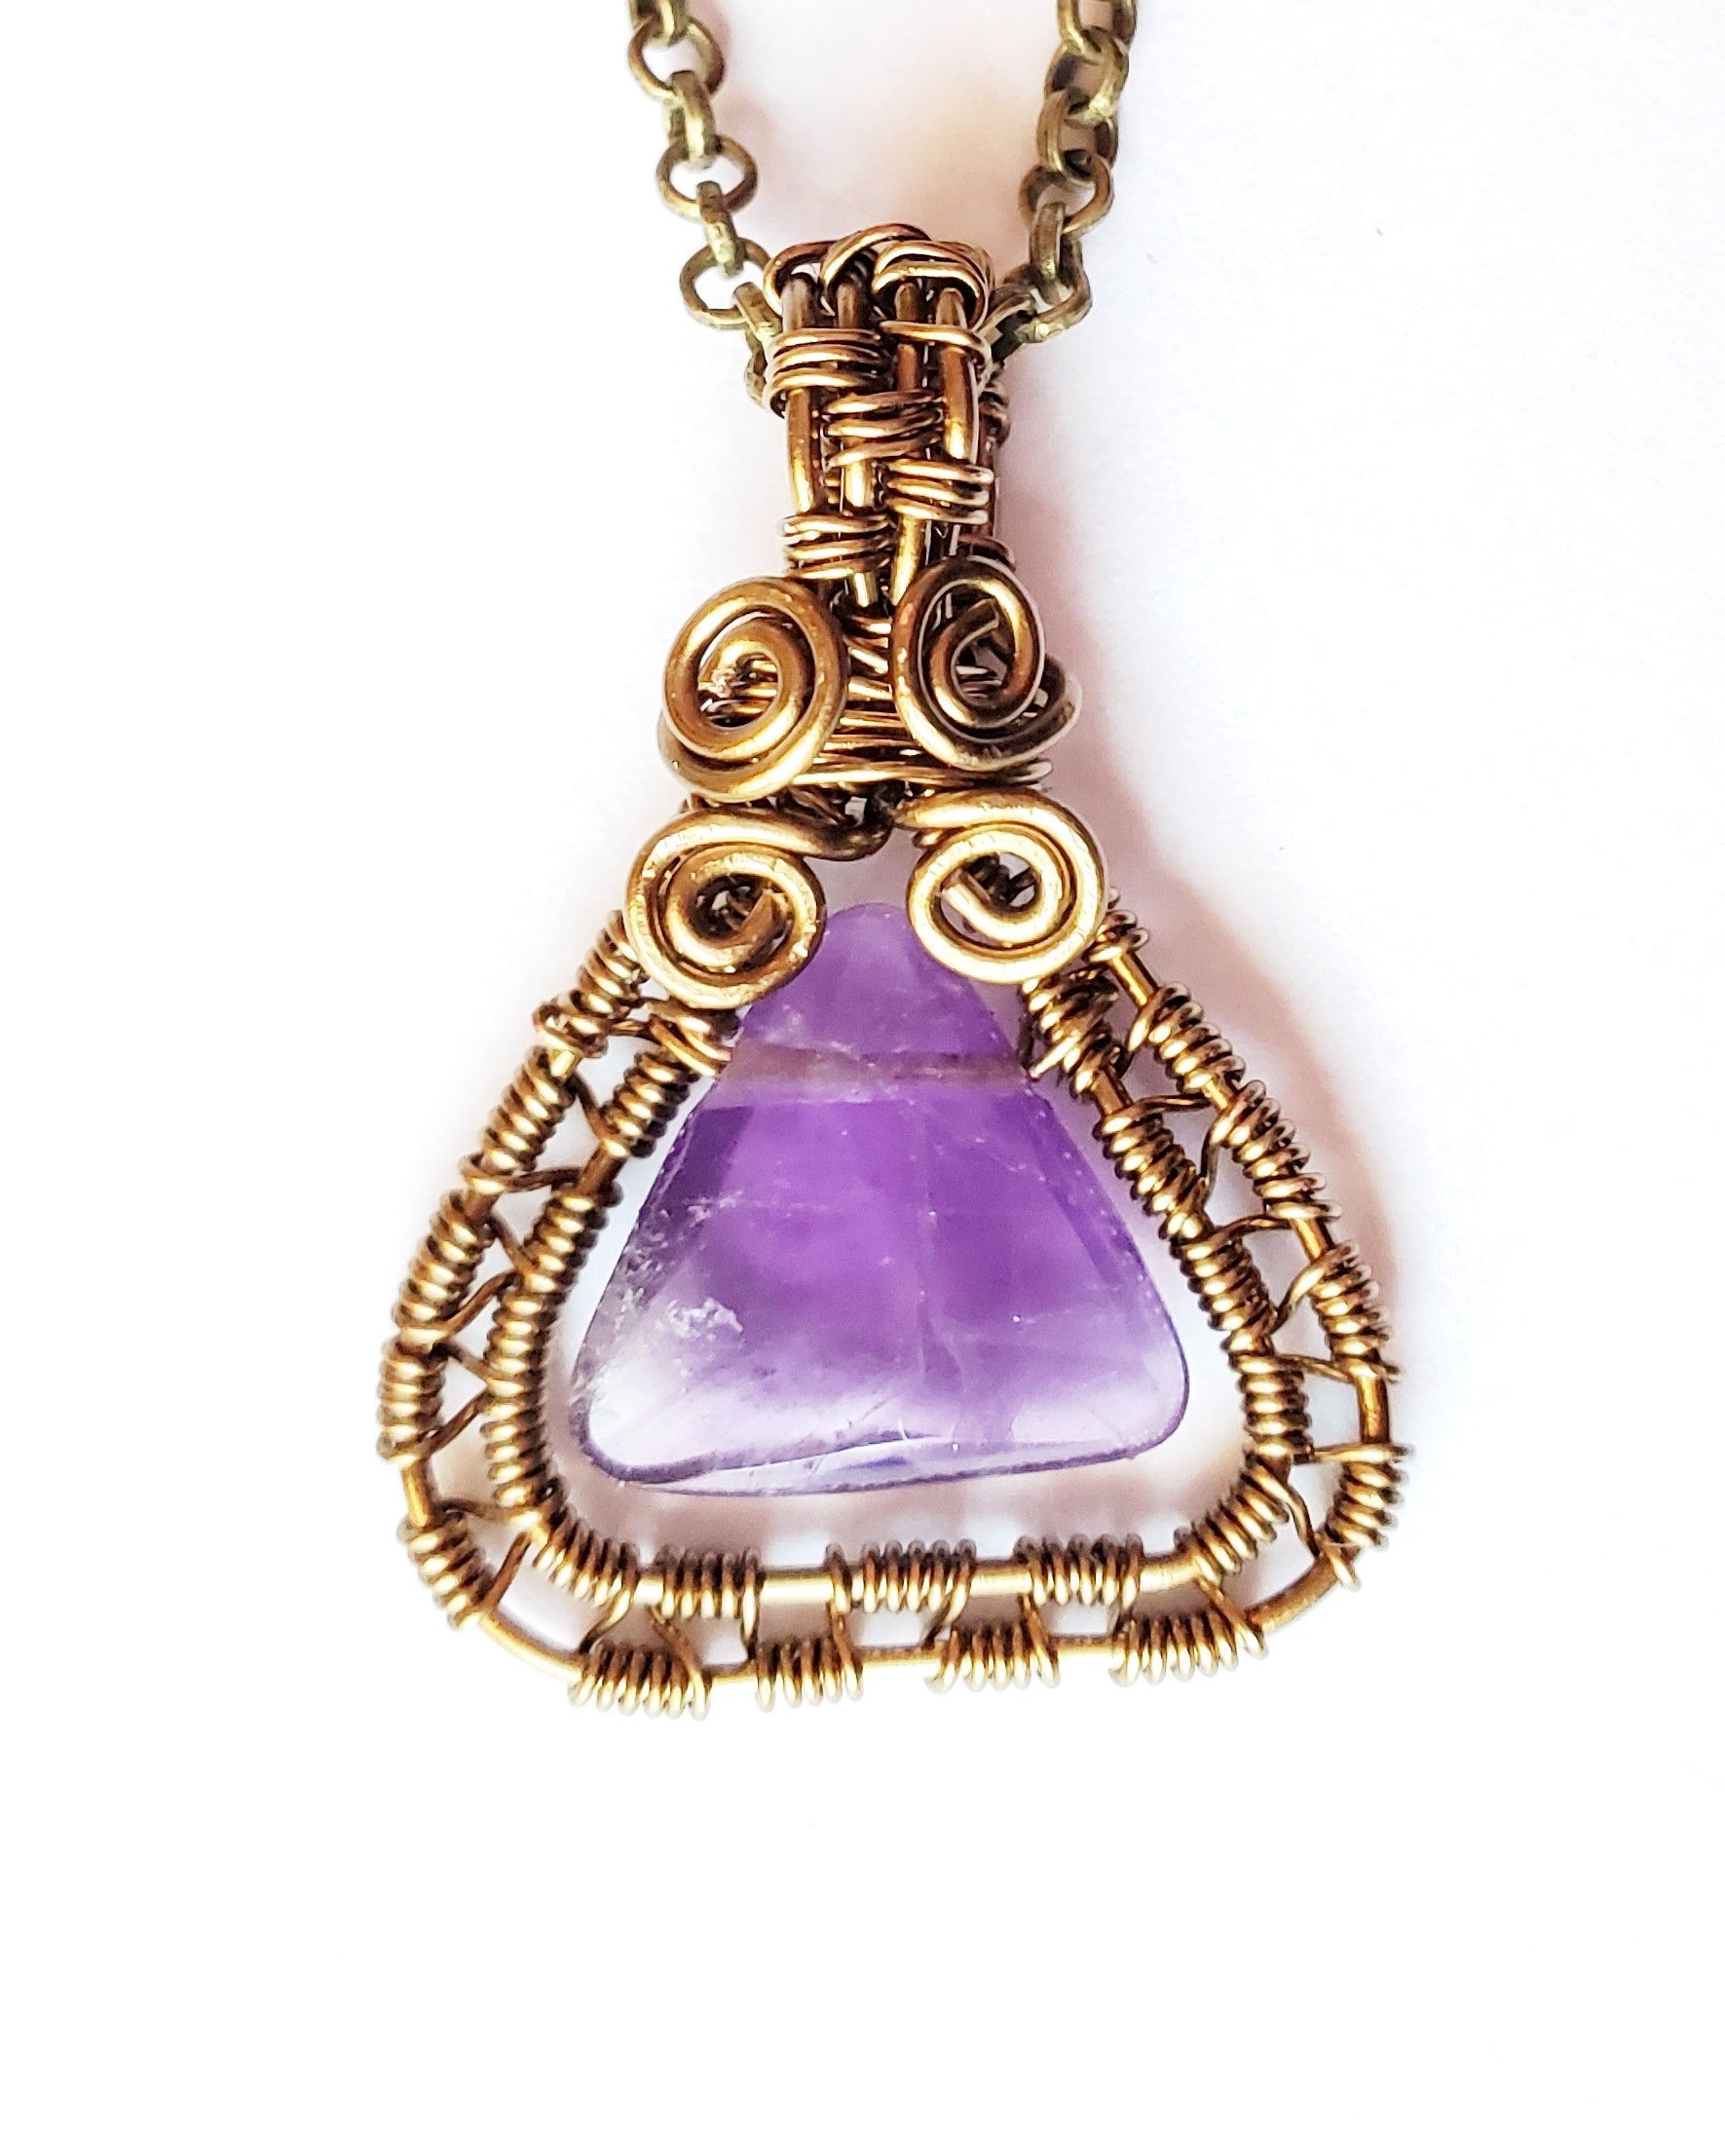 Peaceful Purple Amethyst Pendant, Triangle shaped Genuine Amethyst, Wire Wrapped with Antiqued on Chain